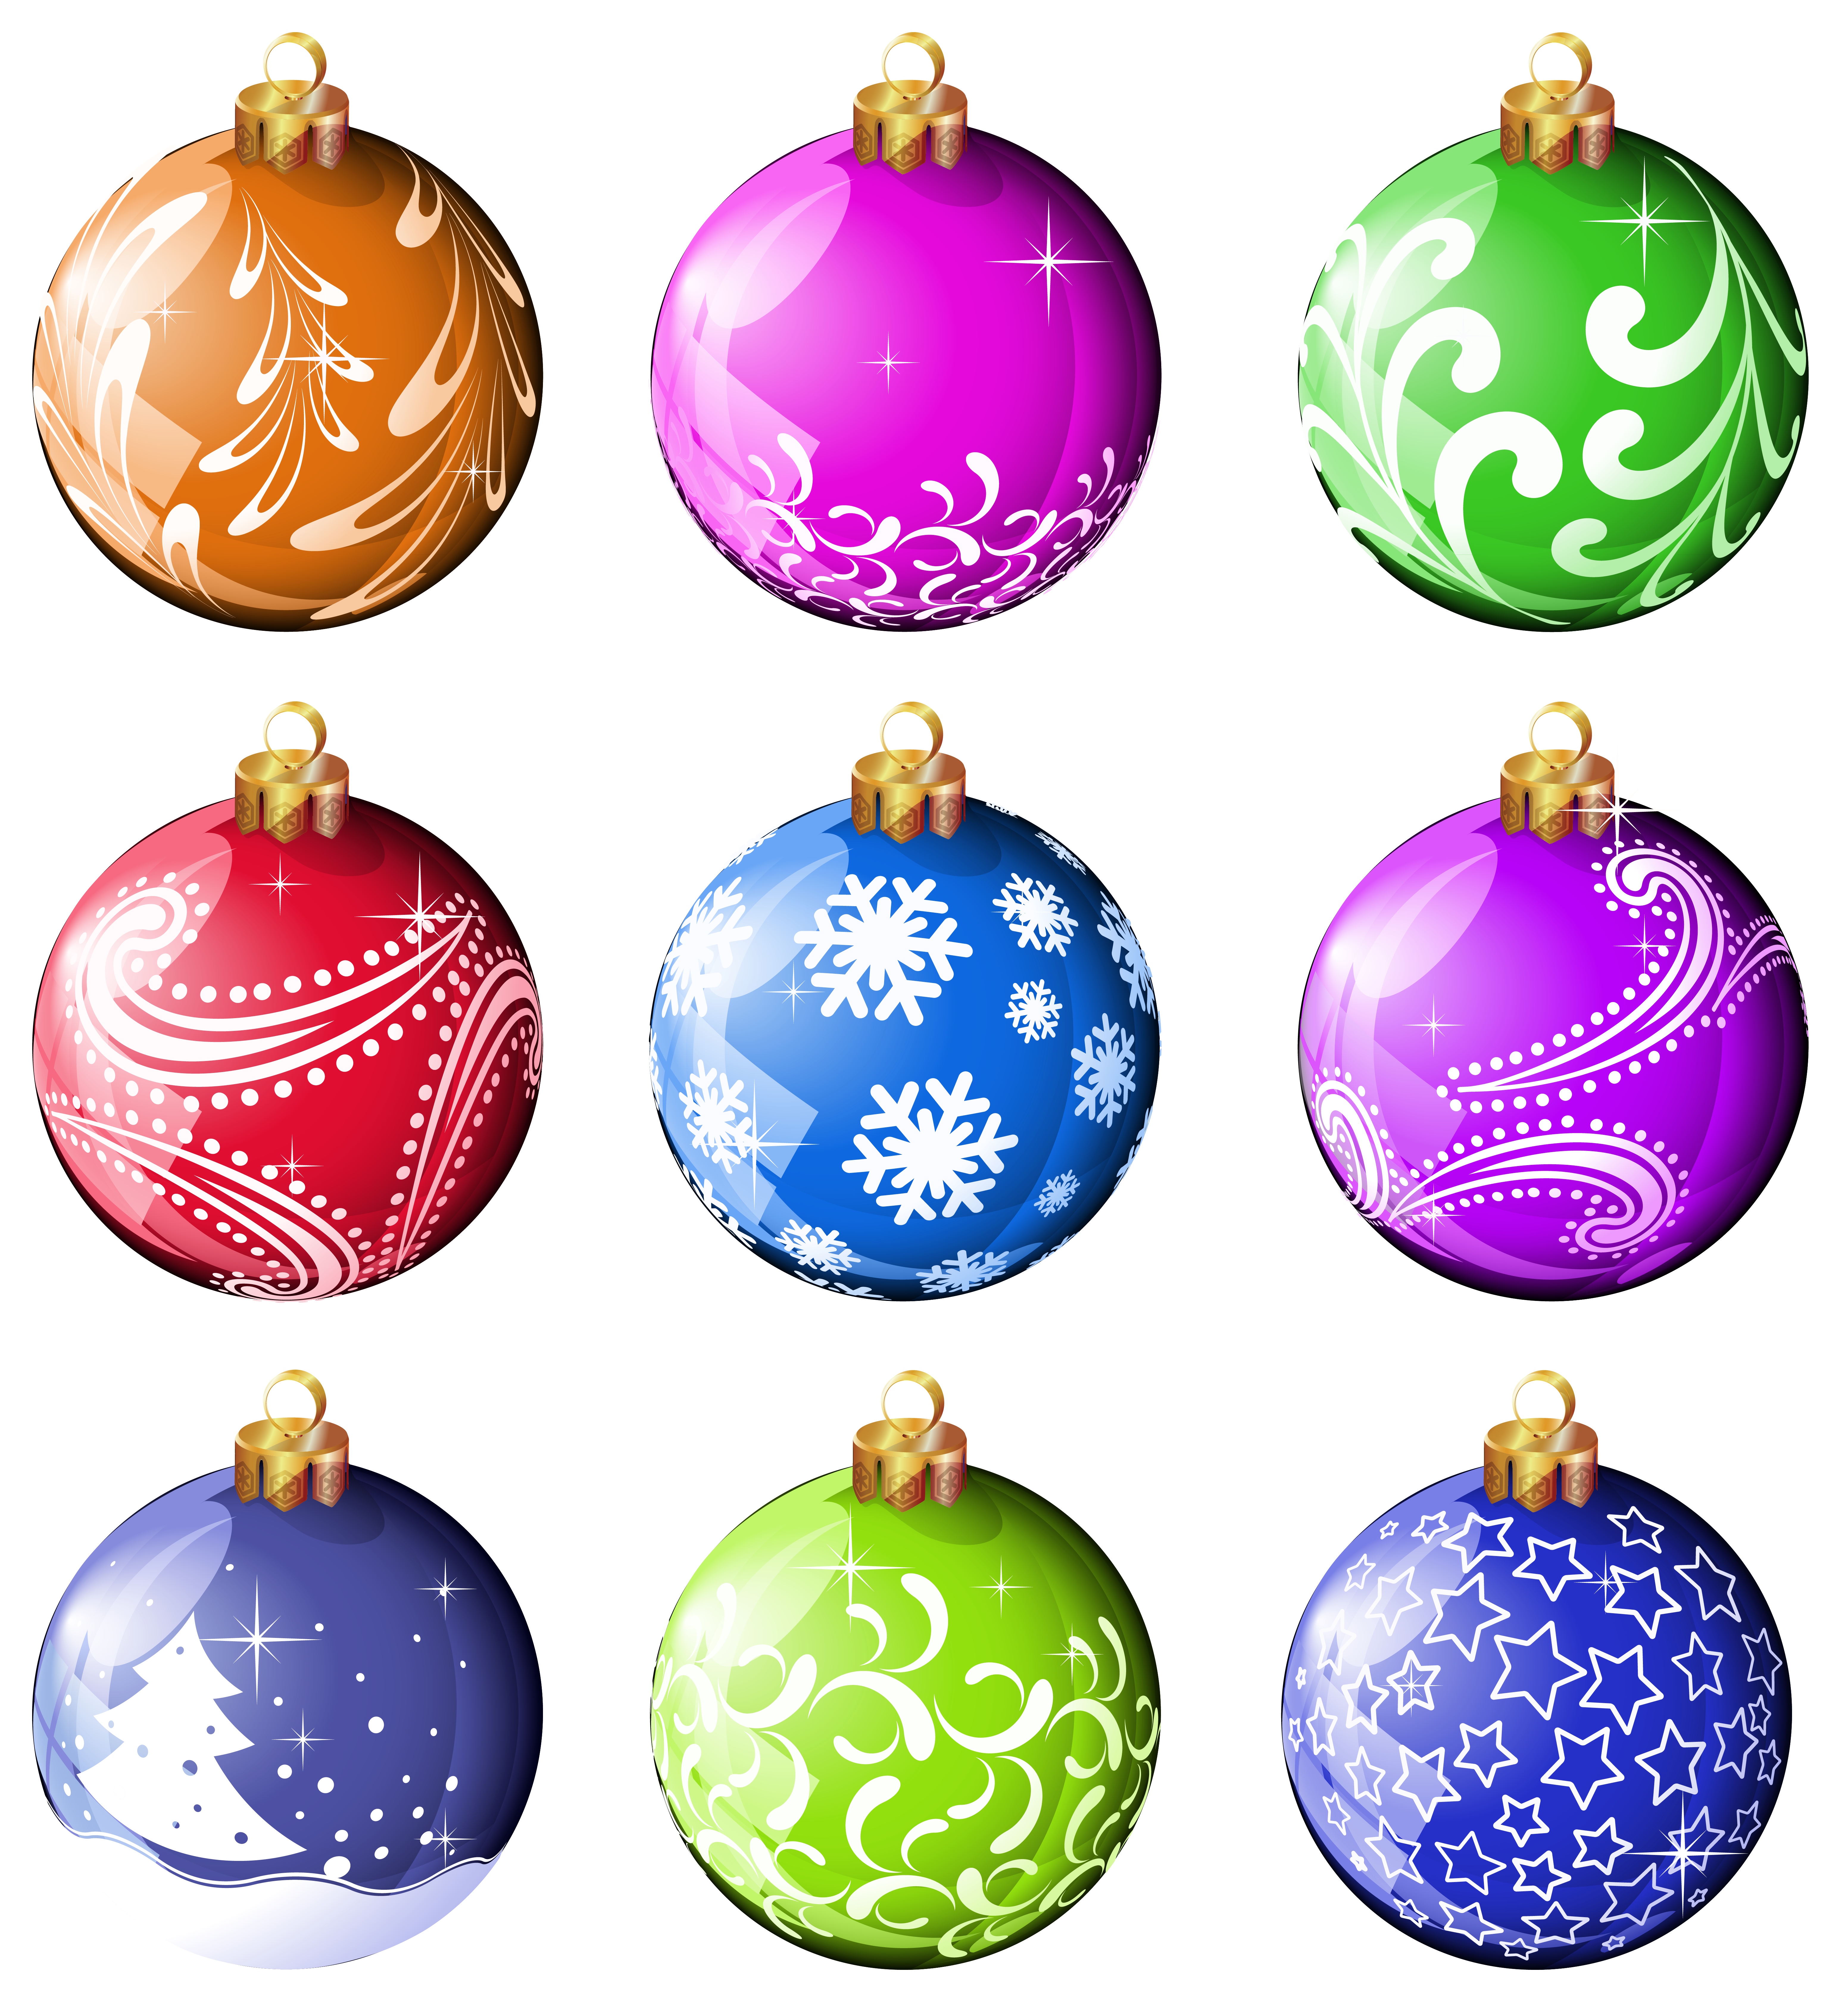 Printable Clipart Christmas Ornaments - Customize and Print